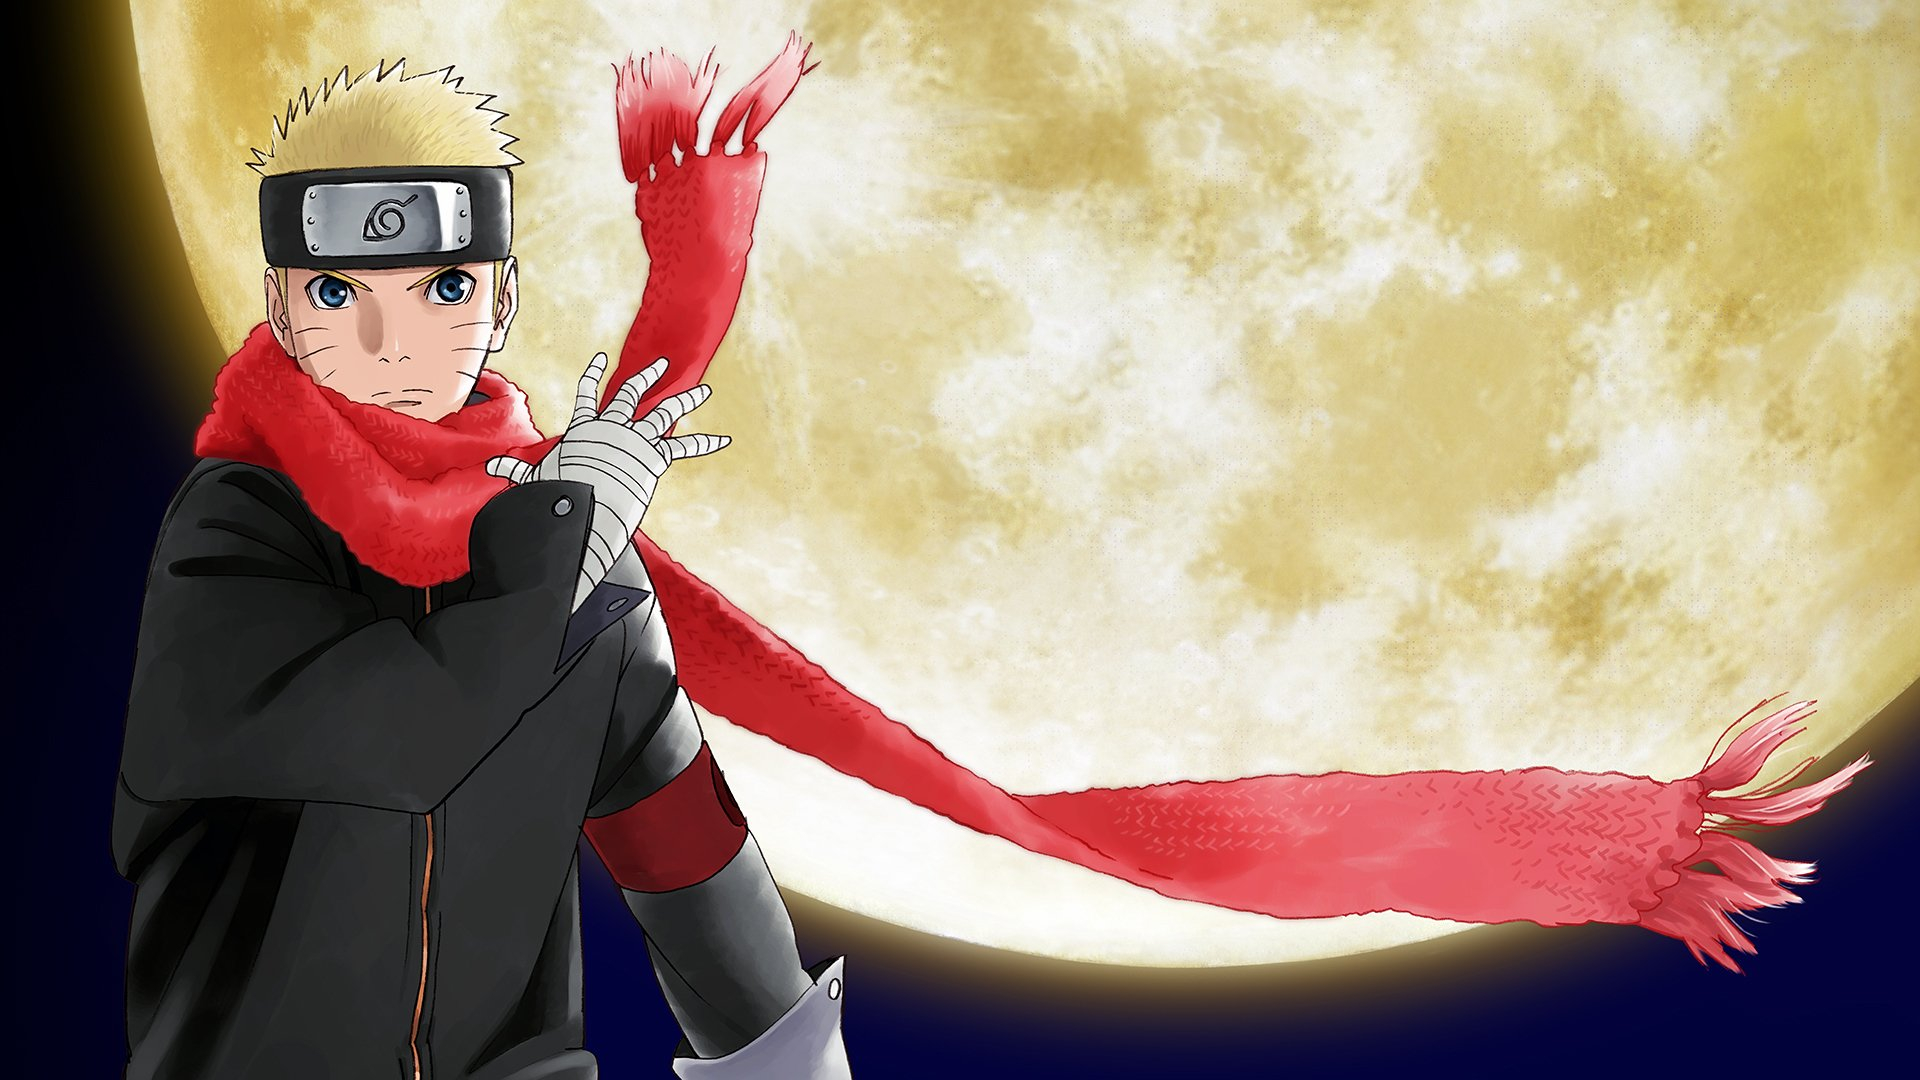 1920x1080 The Last: Naruto the Movie HD Wallpapers and Backgrounds